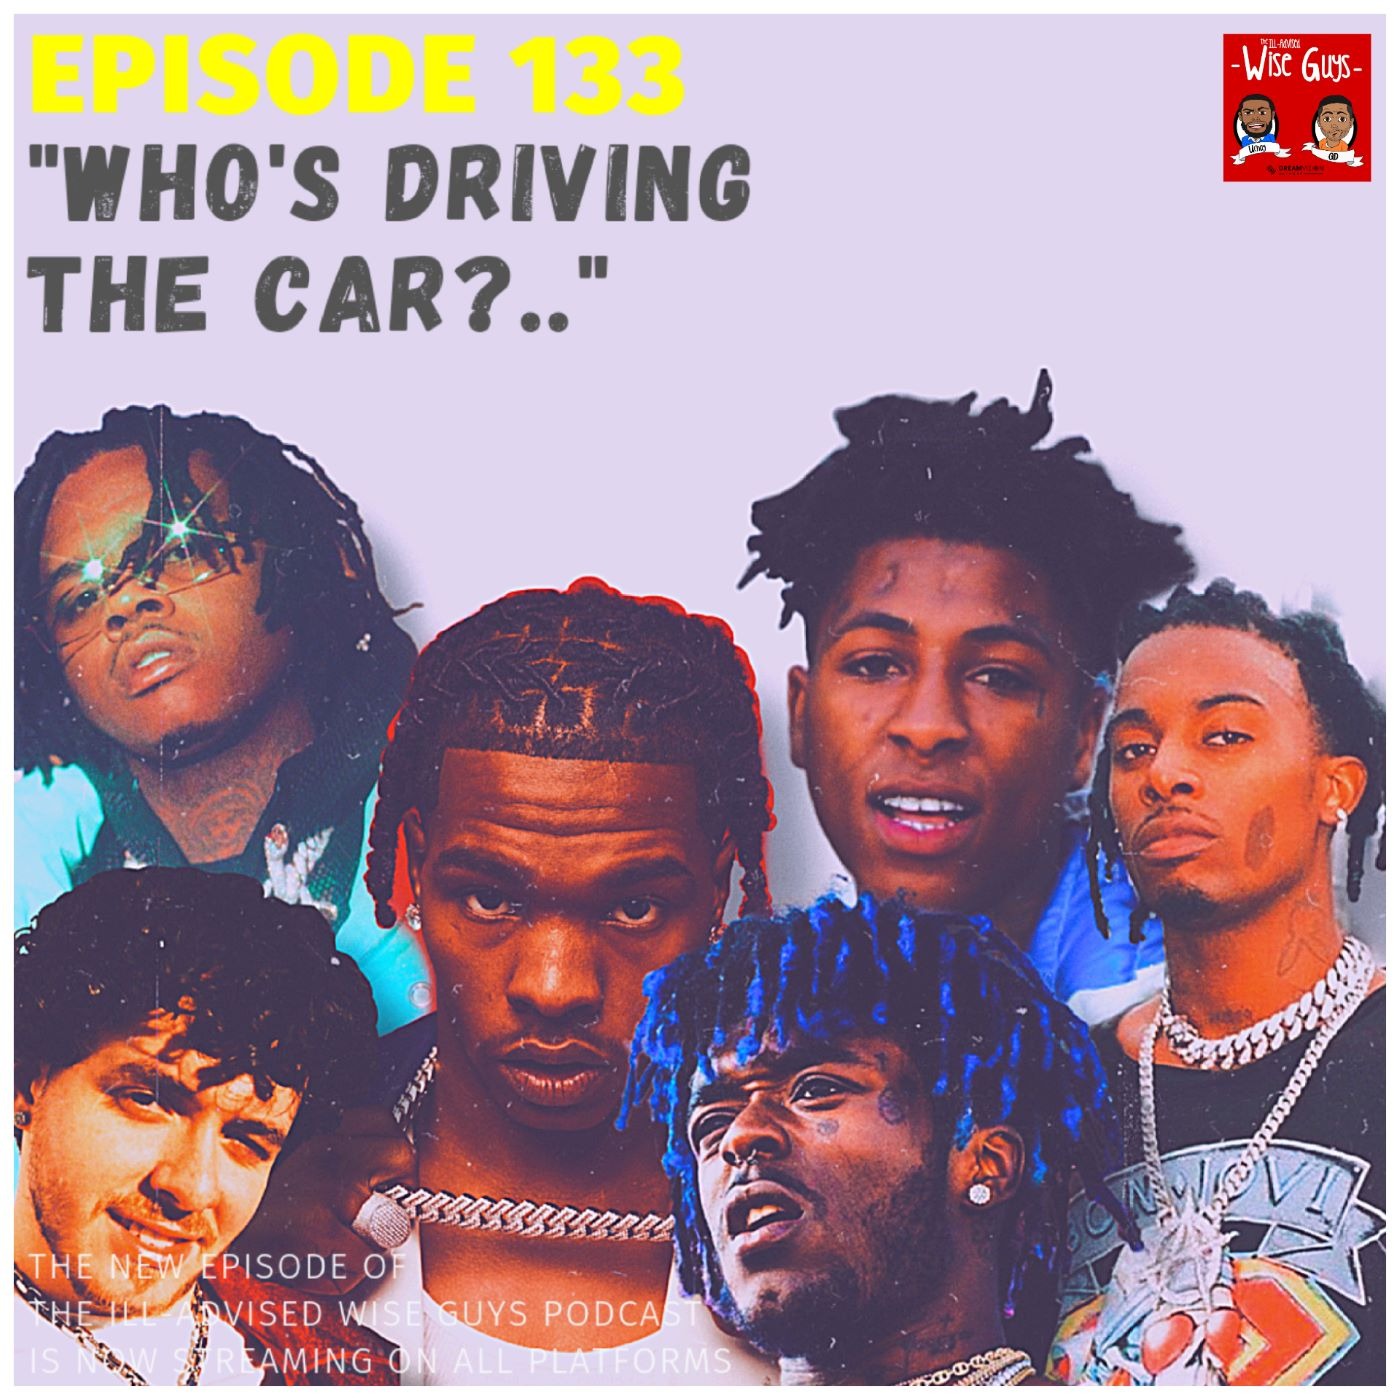 Episode 133 - "Who's Driving The Car?..." Image